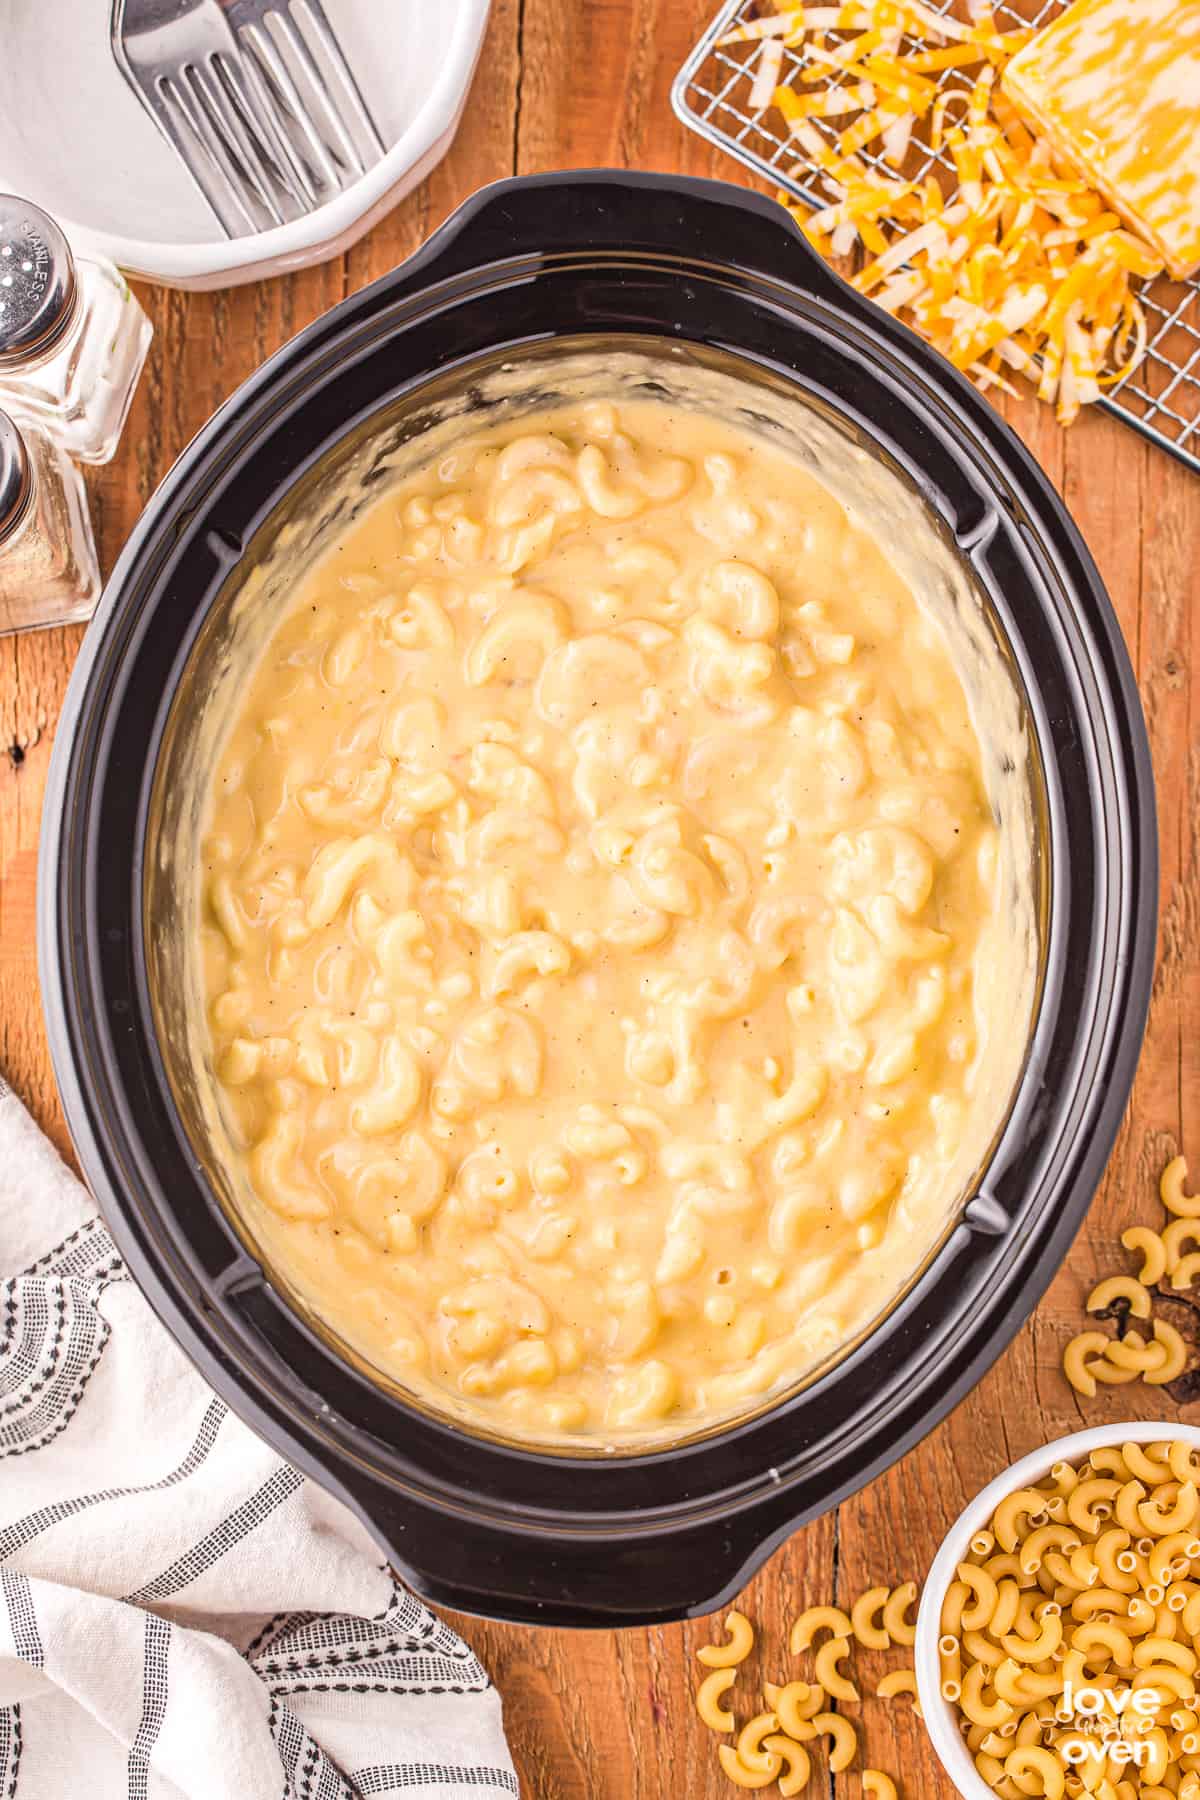 https://www.lovefromtheoven.com/wp-content/uploads/2023/02/crockpot-mac-and-cheese-12.jpg